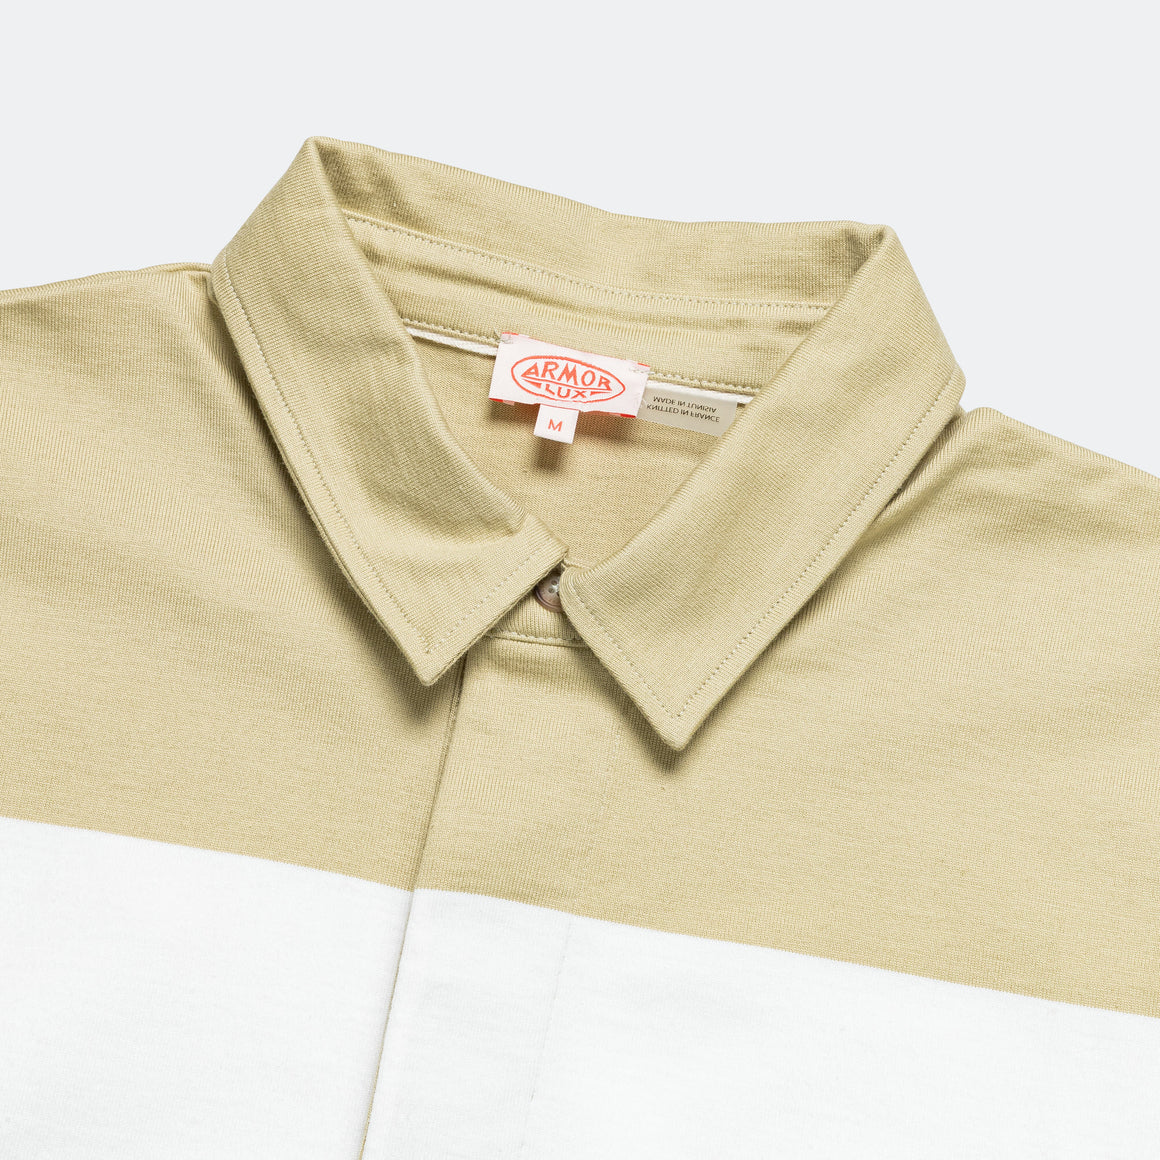 Heritage SS Polo Shirt - Pale Olive/Milk